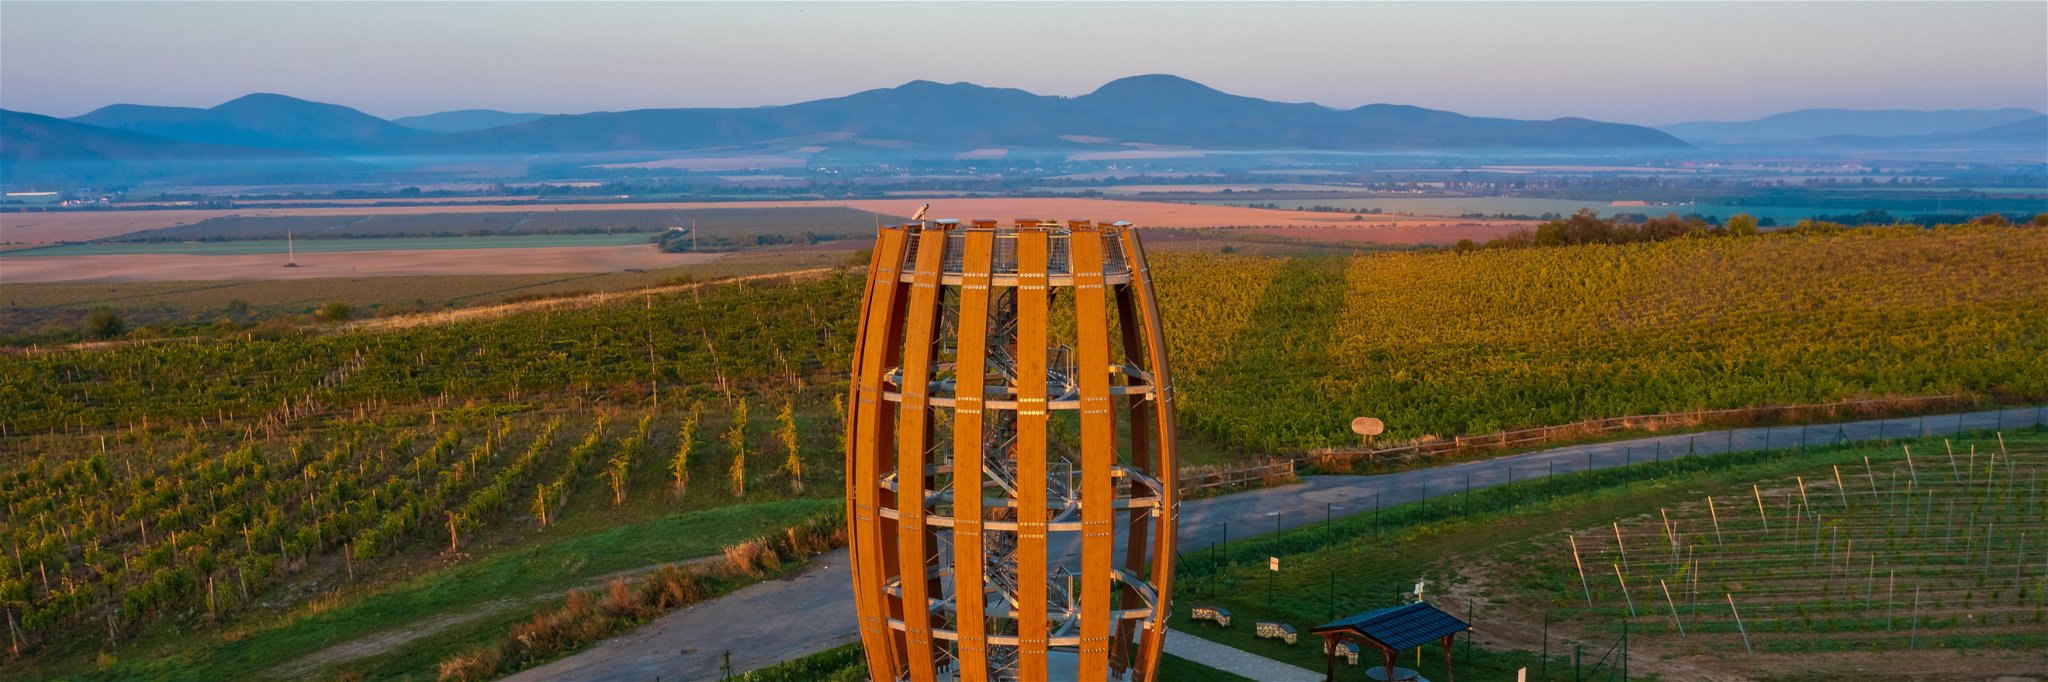 The lookout tower in the wine region of Tokaj, where Furmint grapes grow.